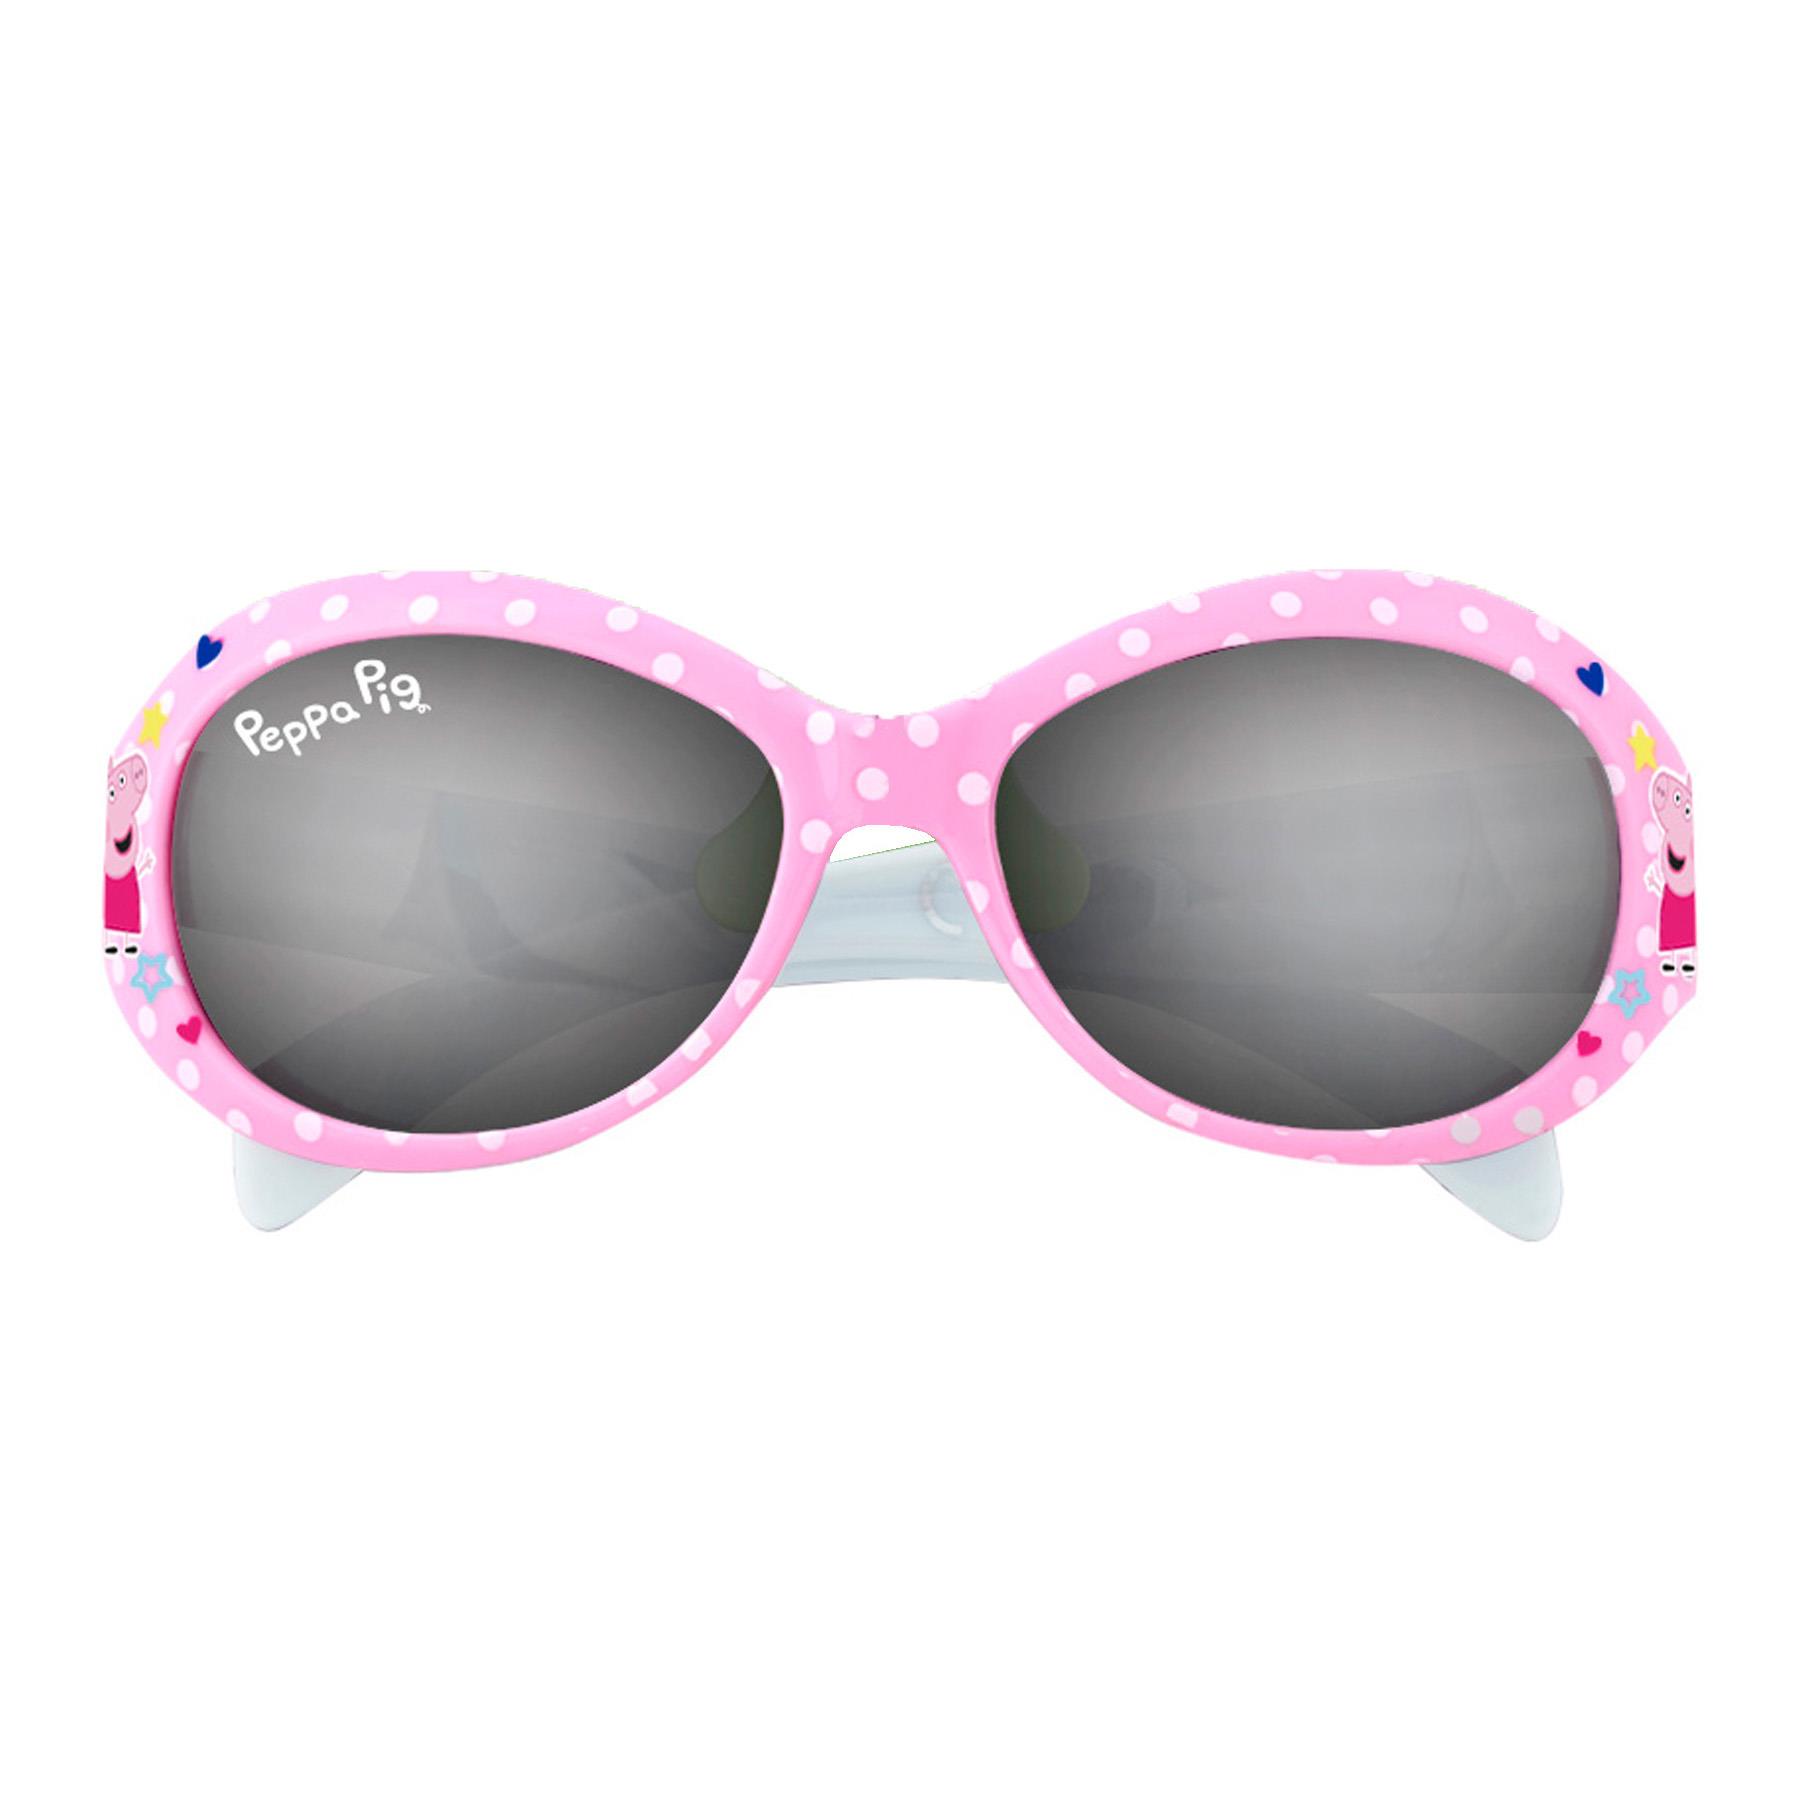 Peppa Pig Children's Character Sunglasses UV protection for Holiday - PEPPA7